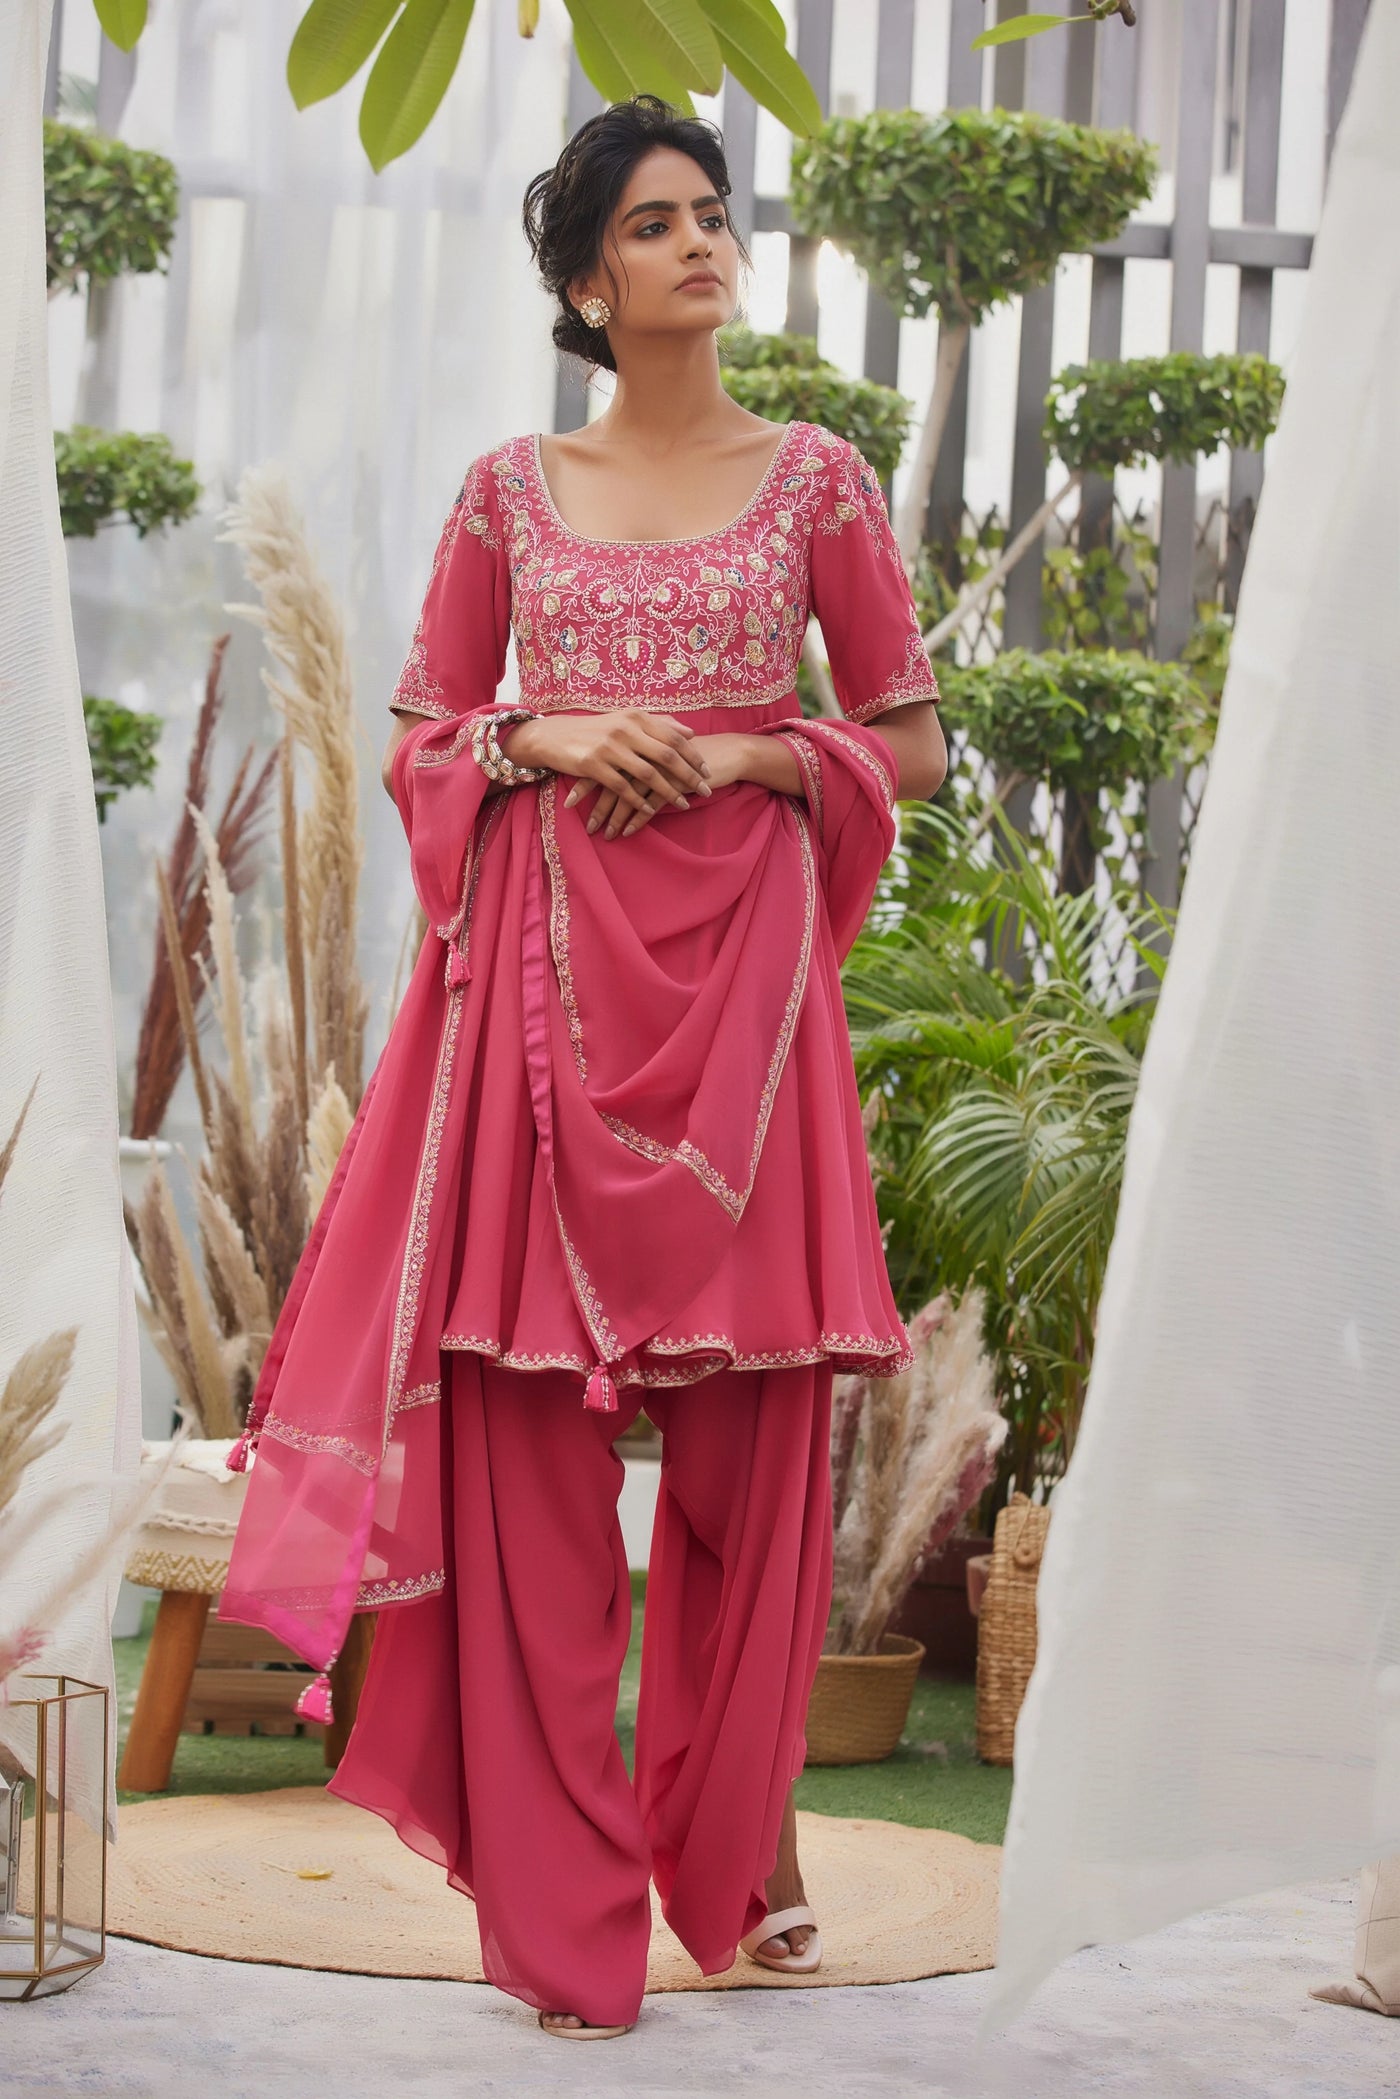 Fushia Pink Salwar Suit - Indian Clothing in Denver, CO, Aurora, CO, Boulder, CO, Fort Collins, CO, Colorado Springs, CO, Parker, CO, Highlands Ranch, CO, Cherry Creek, CO, Centennial, CO, and Longmont, CO. Nationwide shipping USA - India Fashion X